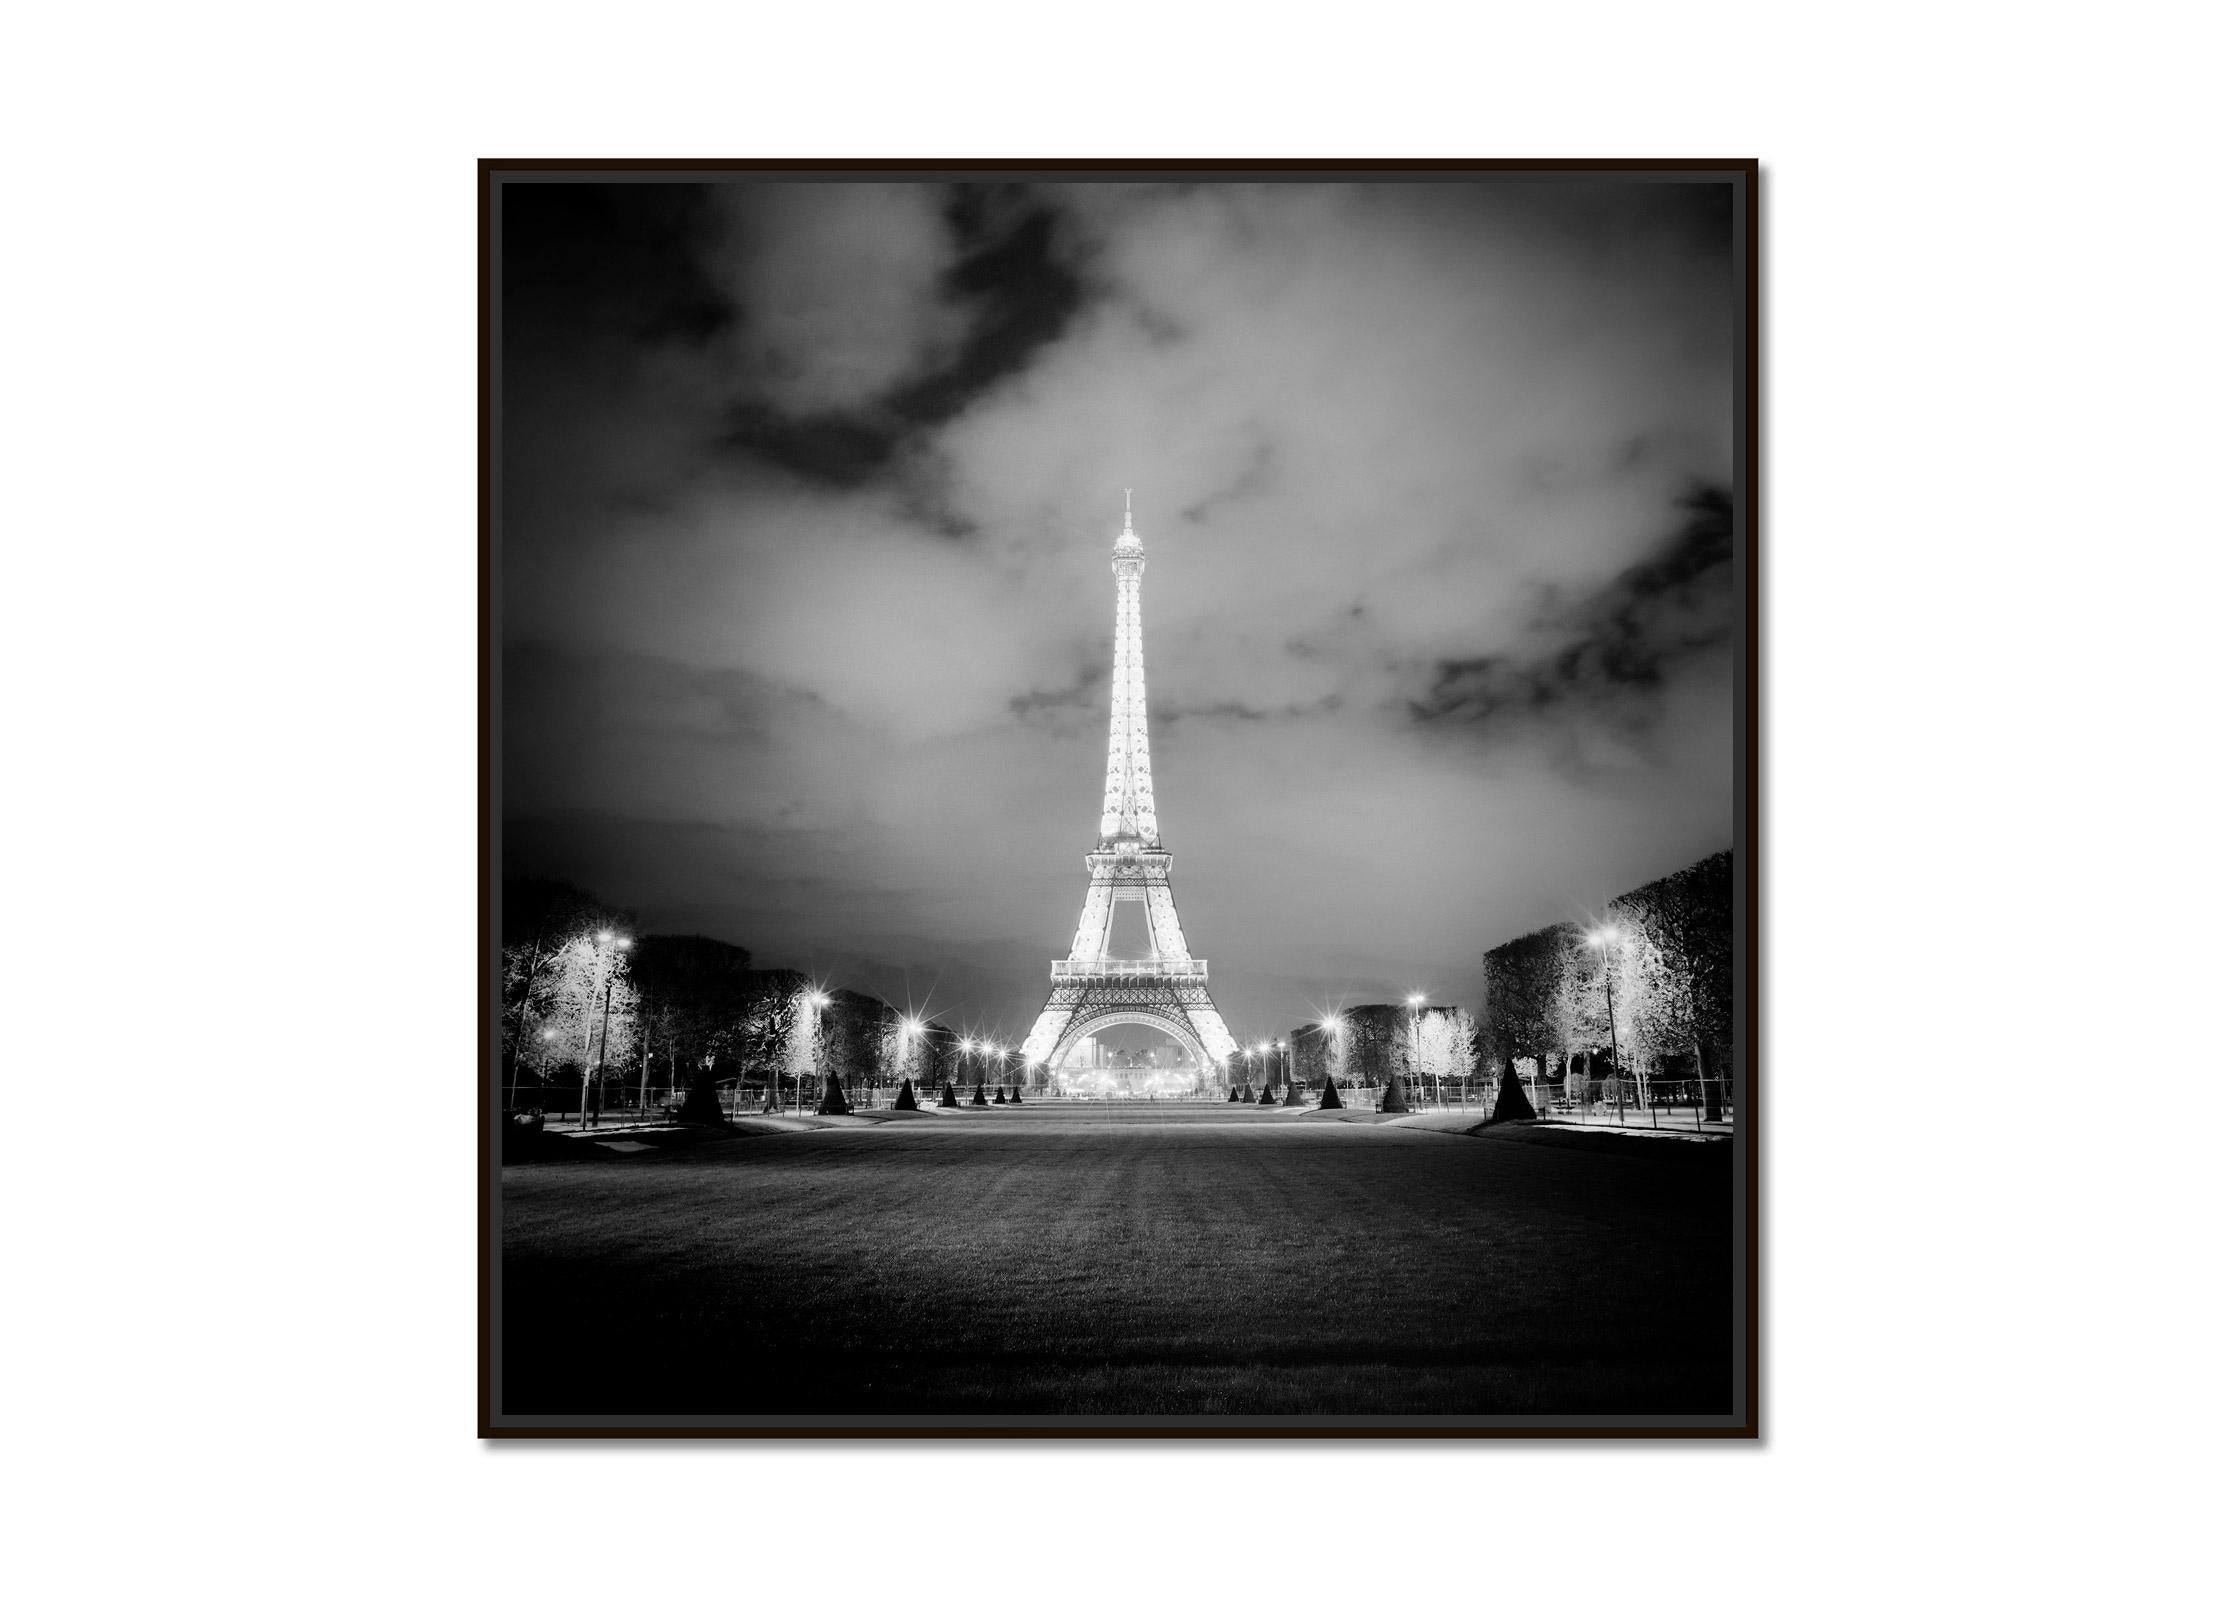 Eiffel Tower, Night, Paris, light show, black and white photography, cityscape - Photograph by Gerald Berghammer